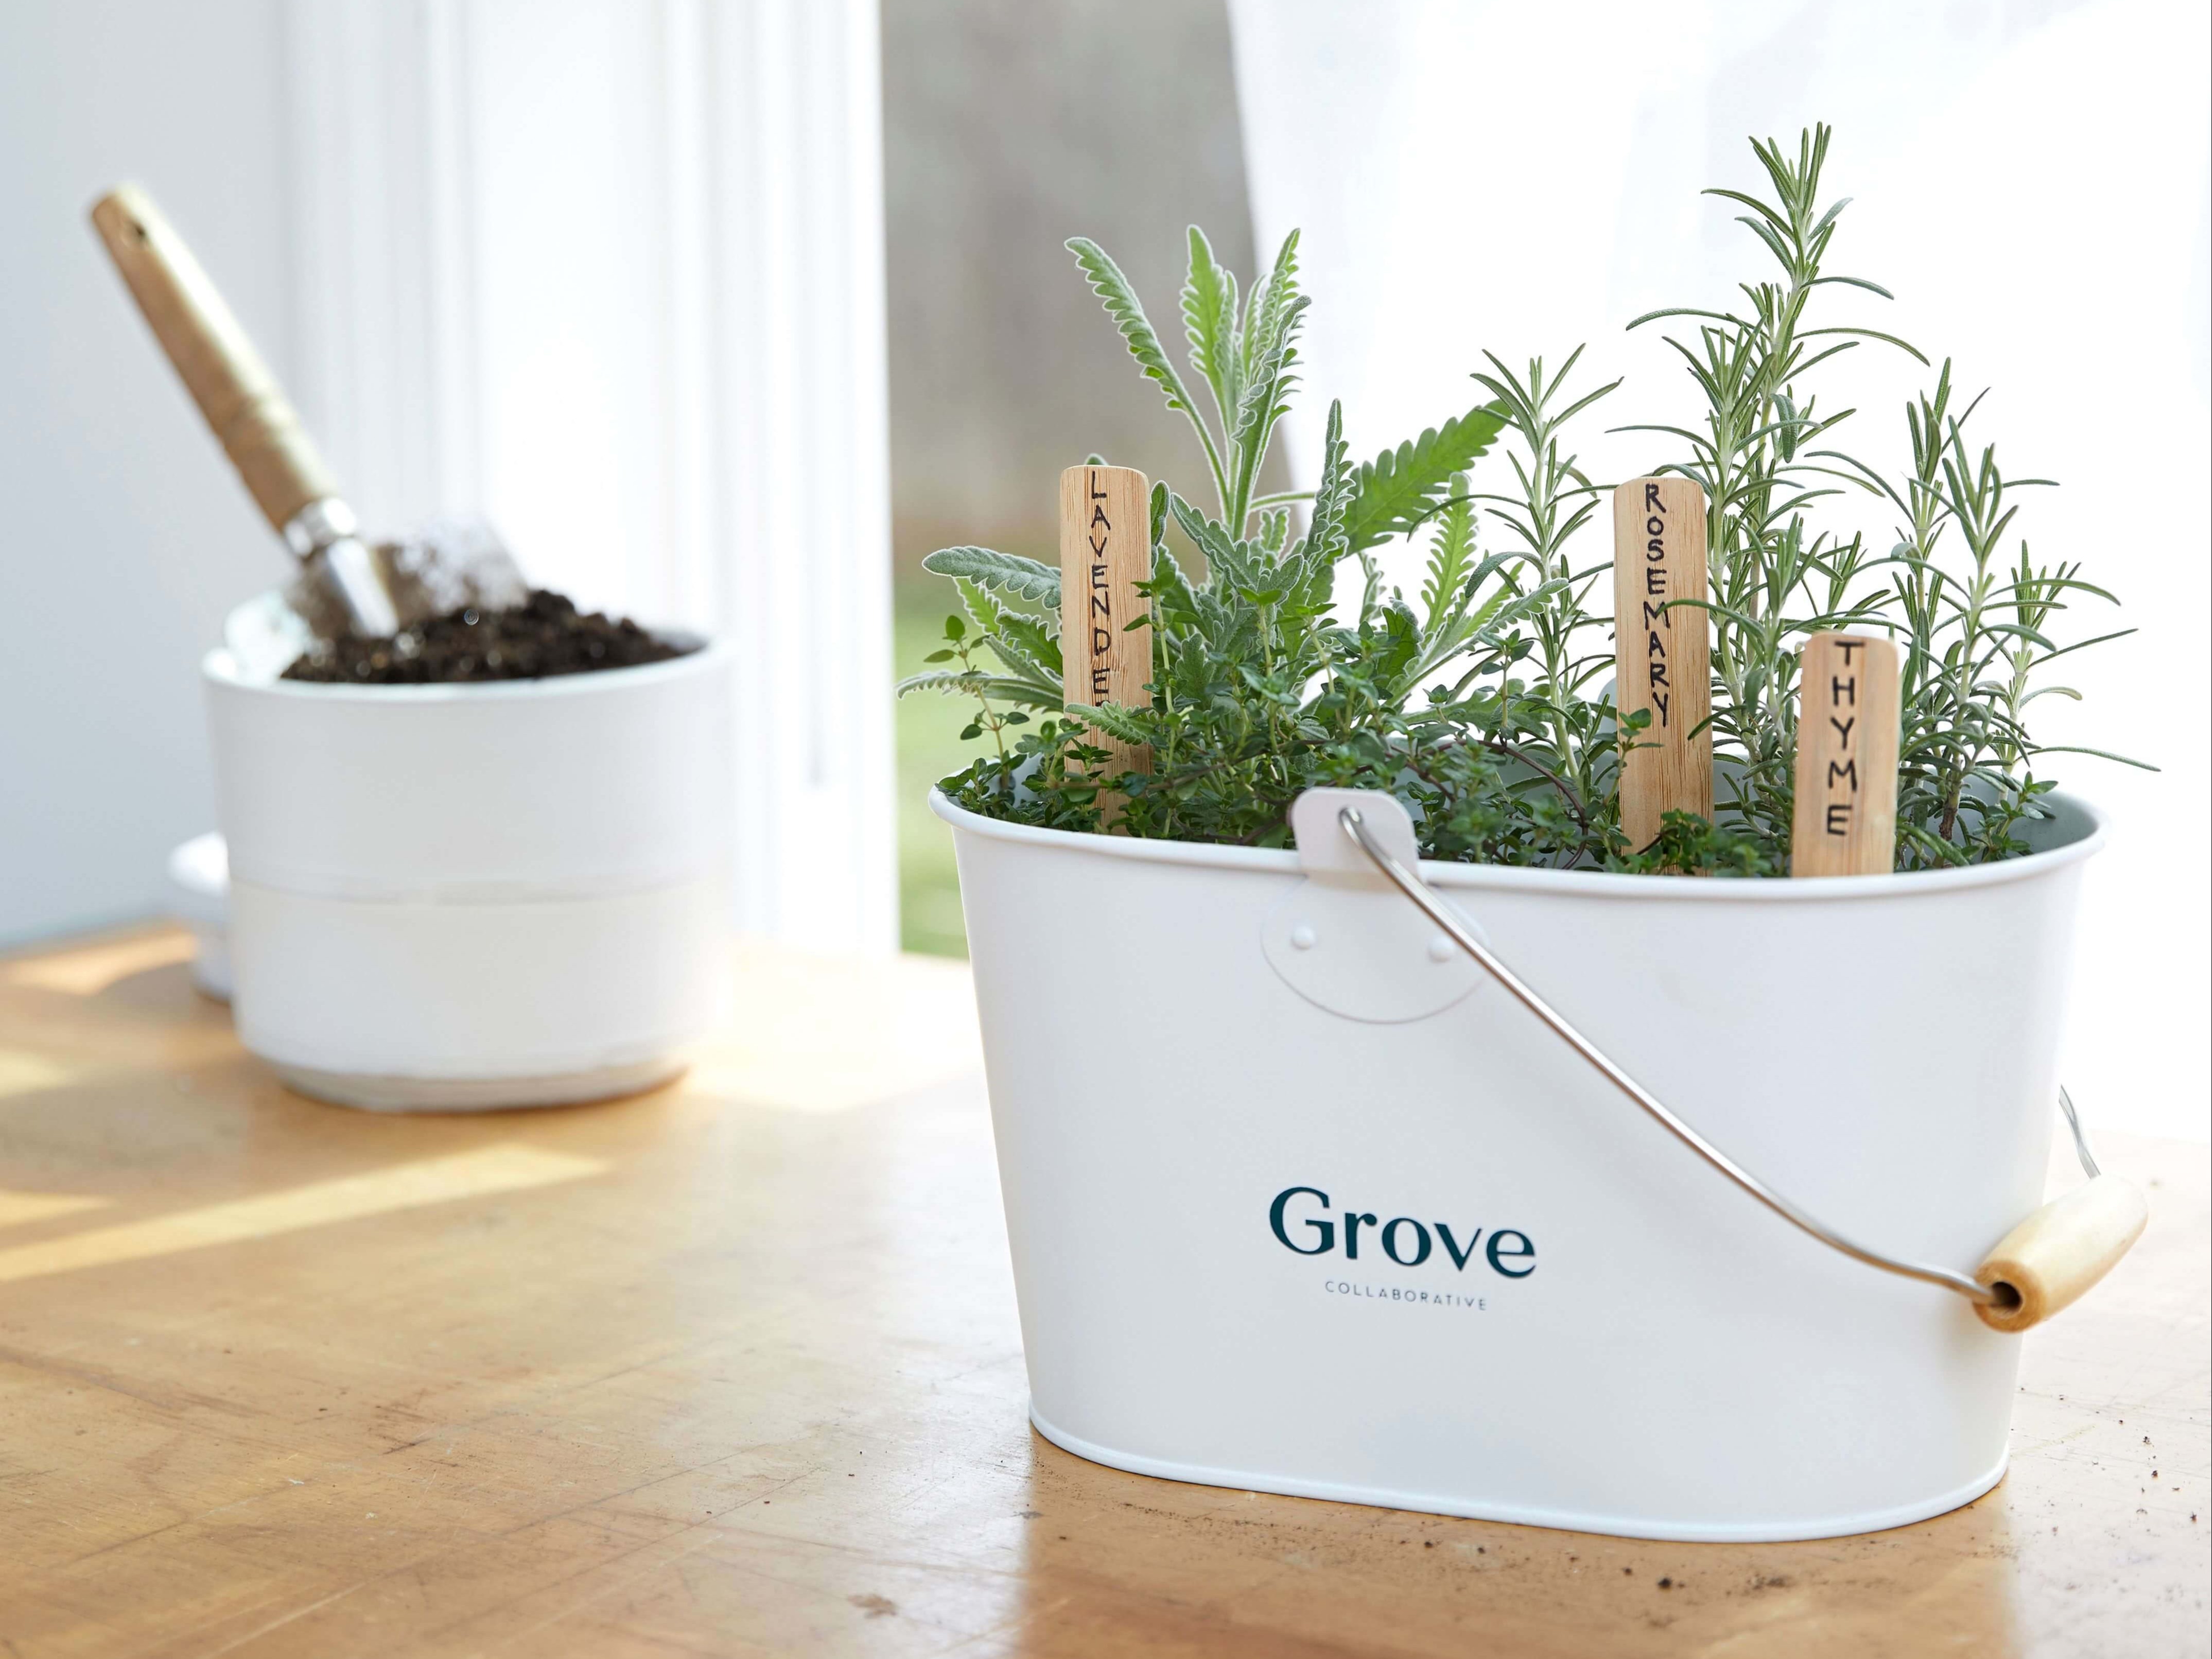 Image of herbs growing in white Grove Collaborative caddy with white pot of soil and shovel in background